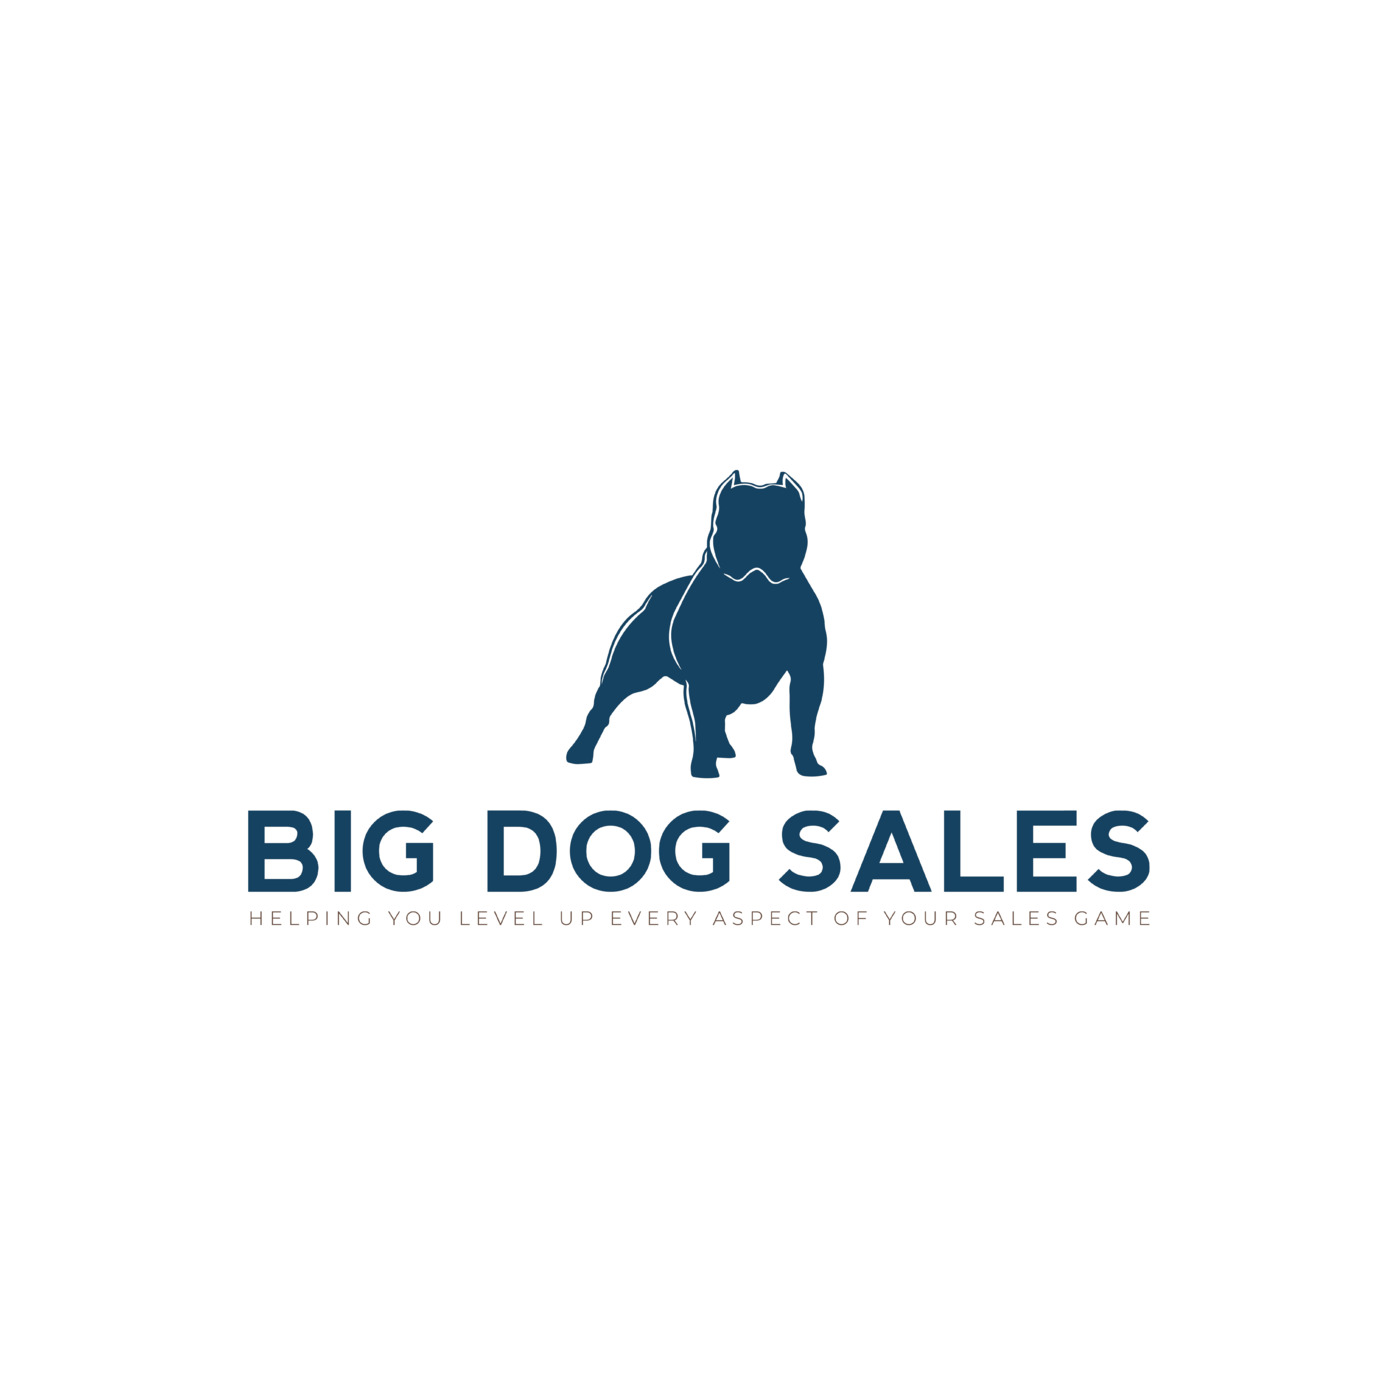 Episode 1: Welcome to the Big Dog Sales Podcast